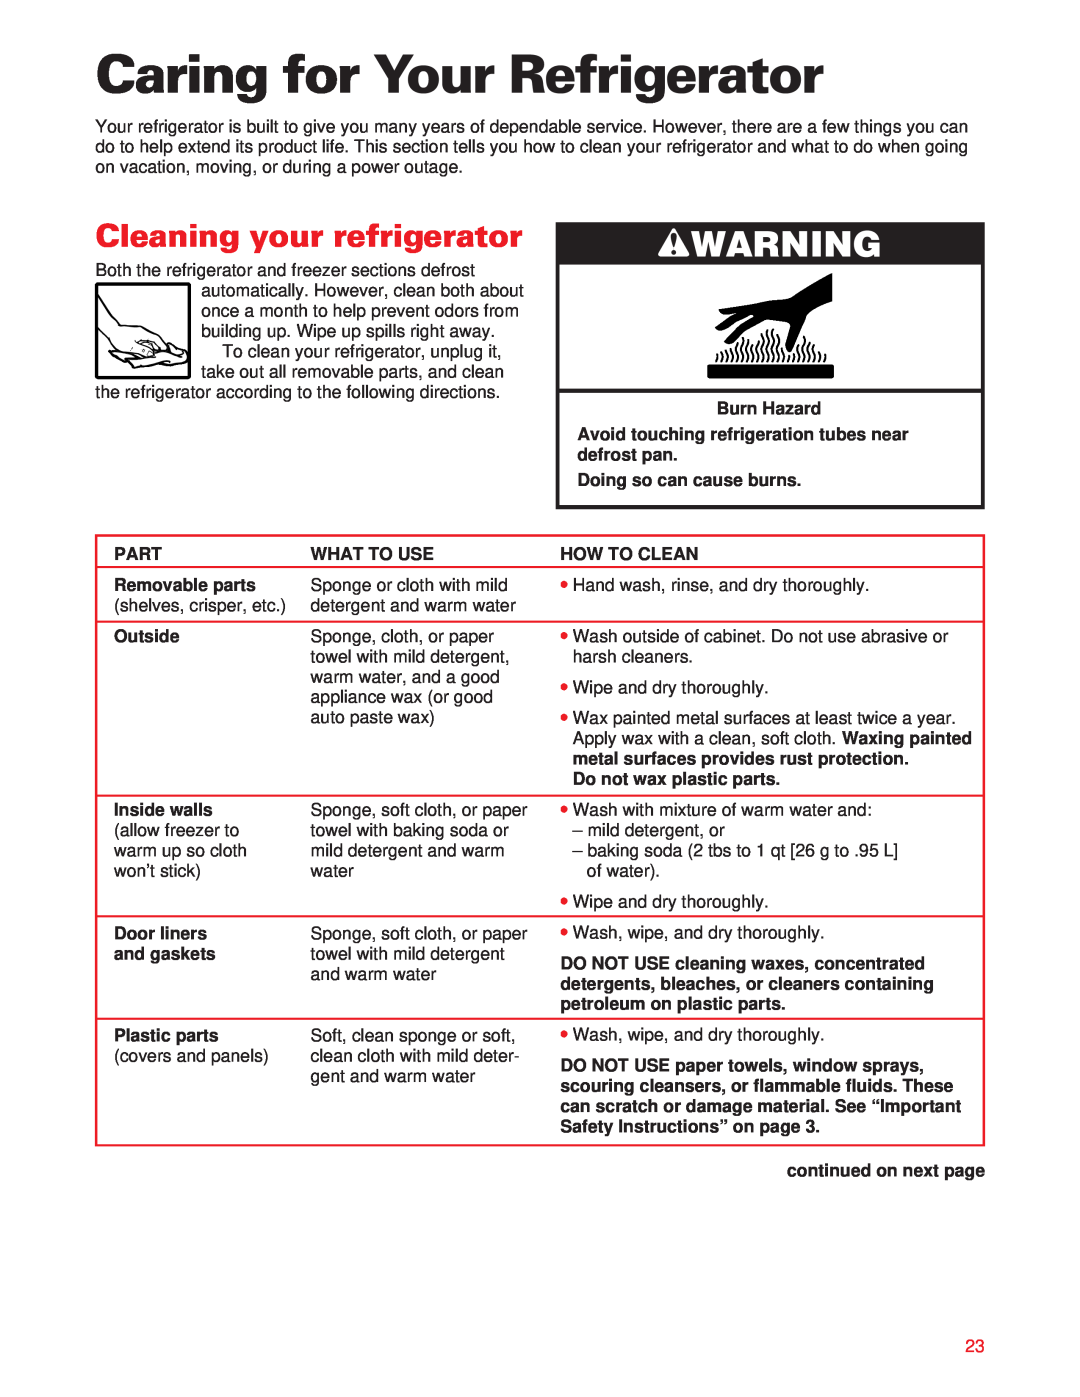 Whirlpool ED20DFXEB00 Caring for Your Refrigerator, wWARNING, Cleaning your refrigerator, Doing so can cause burns, Part 